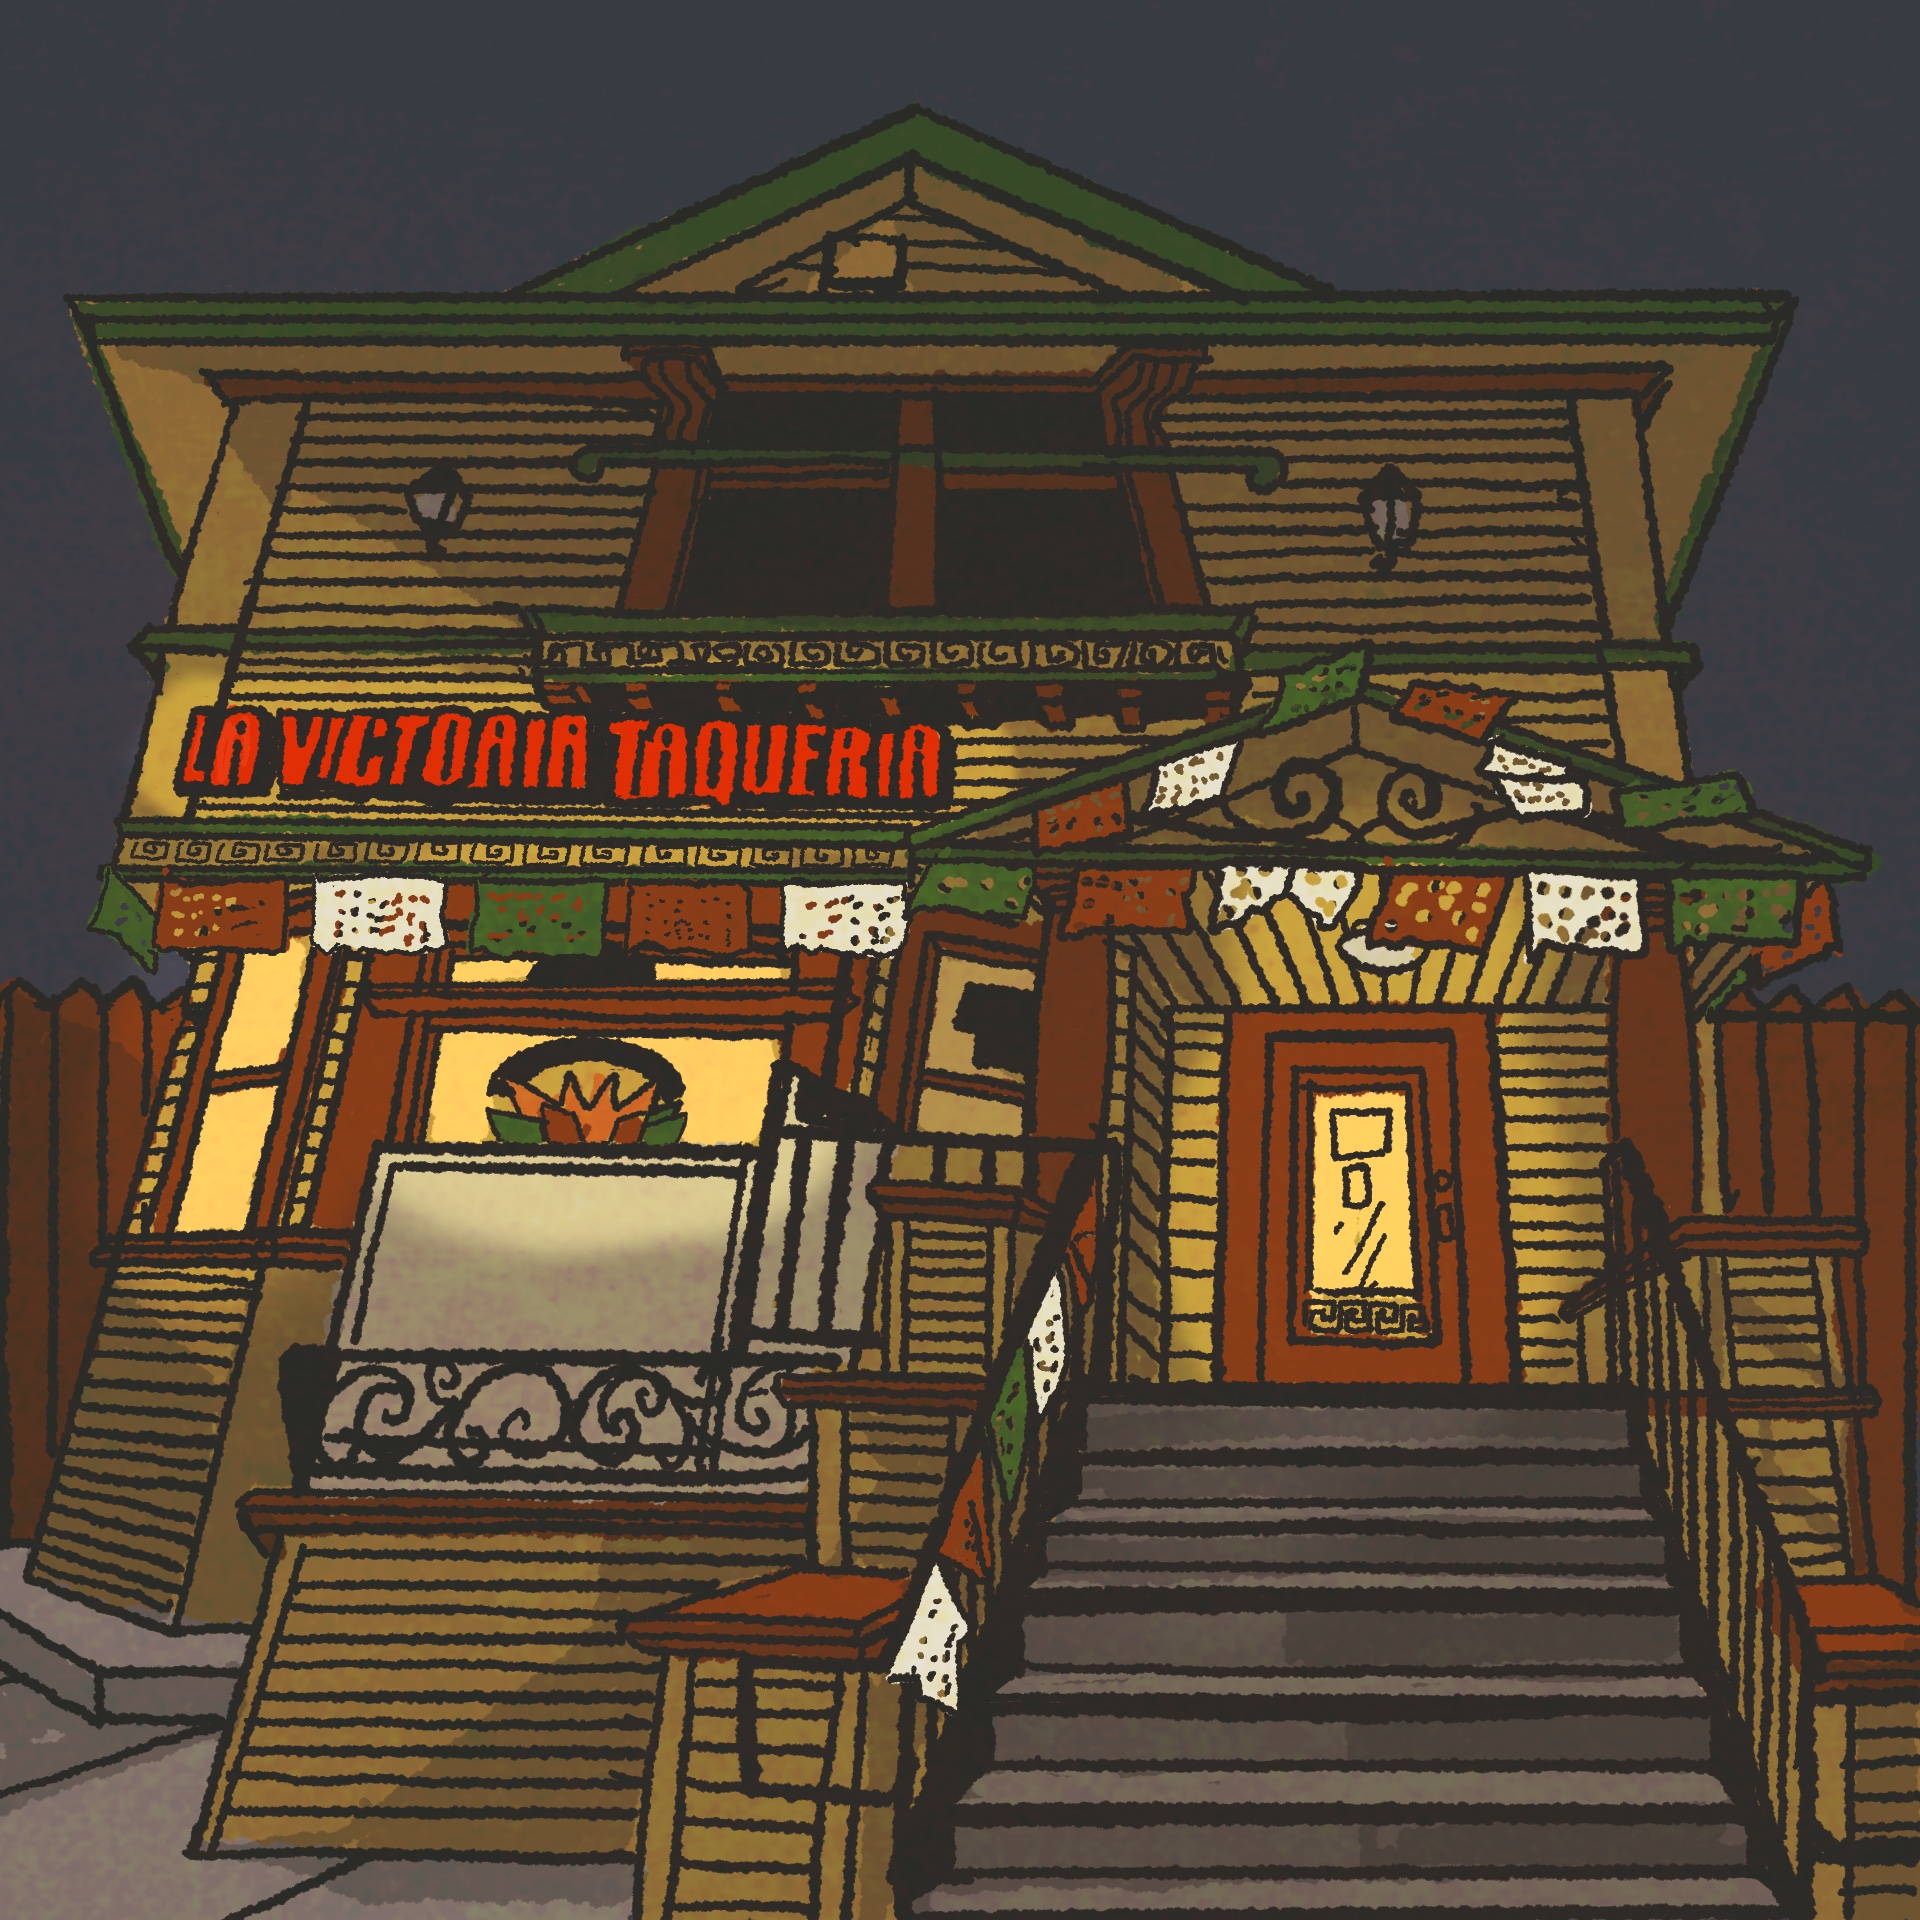 Illustration: Exterior of La Victoria Taqueria, in an old Victorian house, lit up at night.